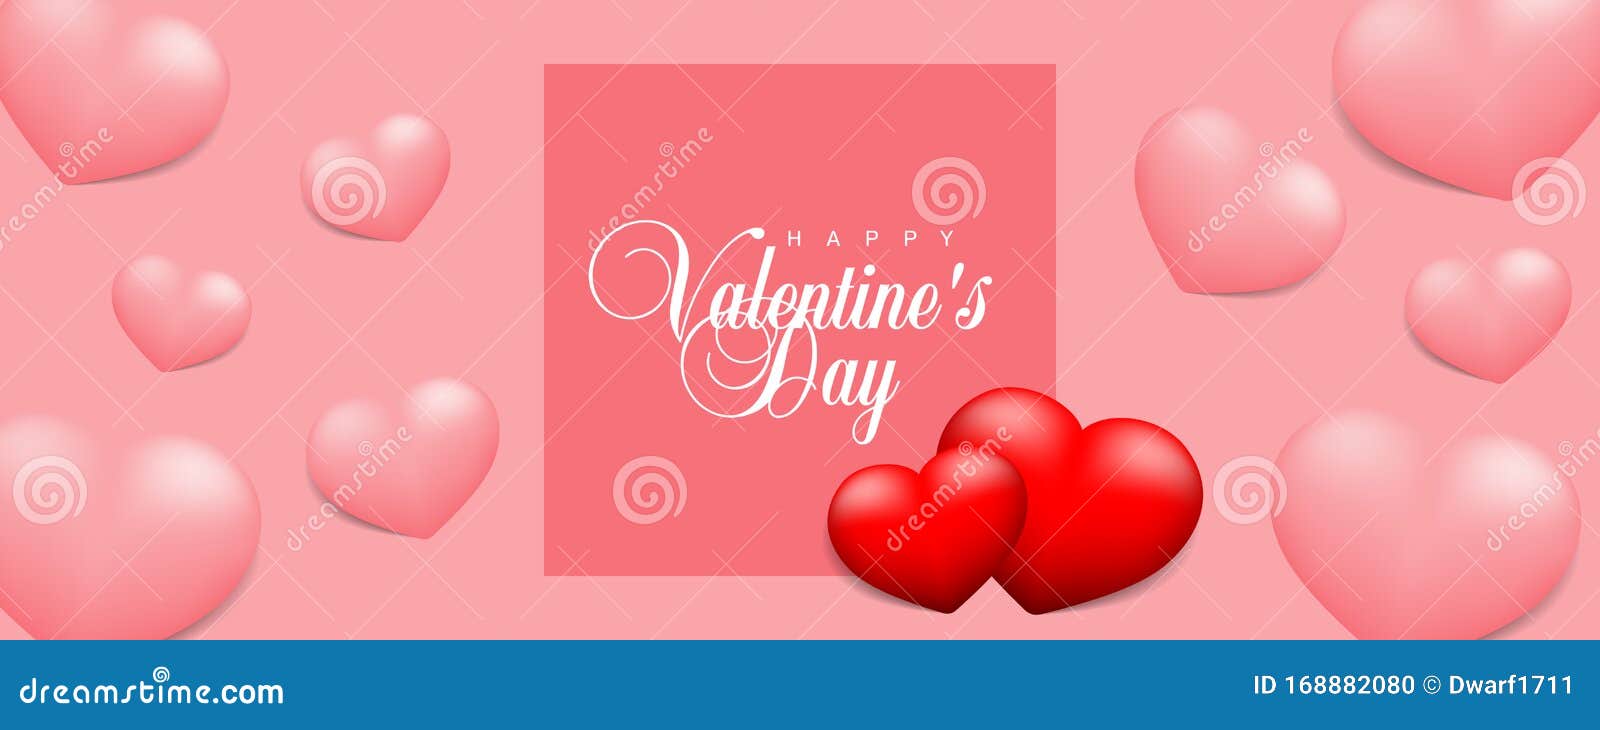 Happy Valentines Day vector illustration banner, flyer, poster, voucher, website header layout with couple red hearts and pink hearts on pink background 